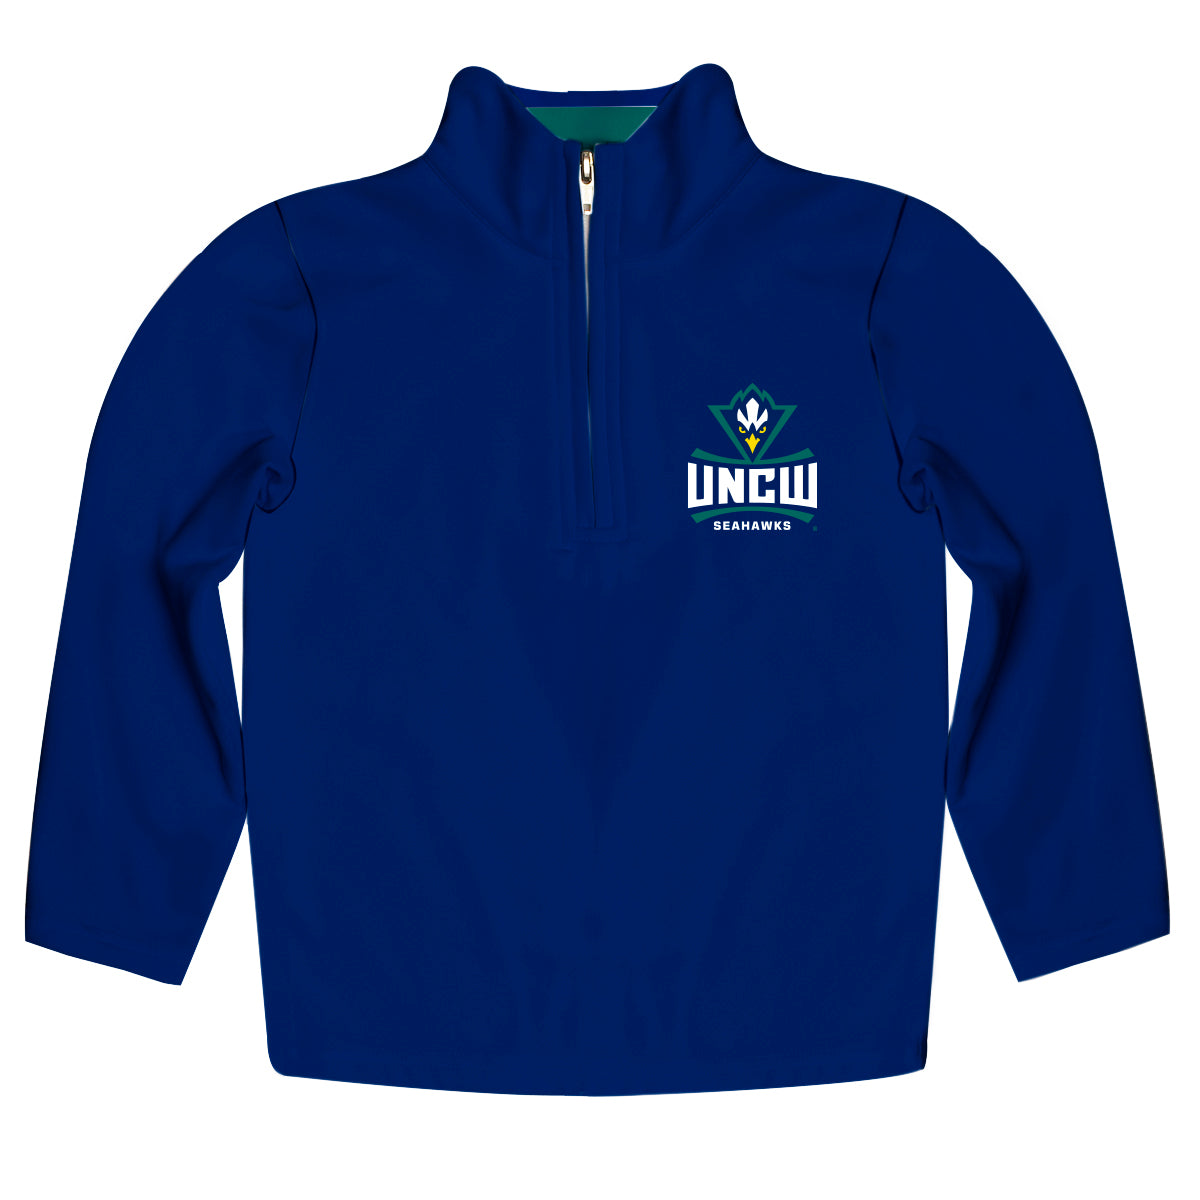 UNC Wilmington Seahawks UNCW Game Day Solid Teal Quarter Zip Pullover for Infants Toddlers by Vive La Fete